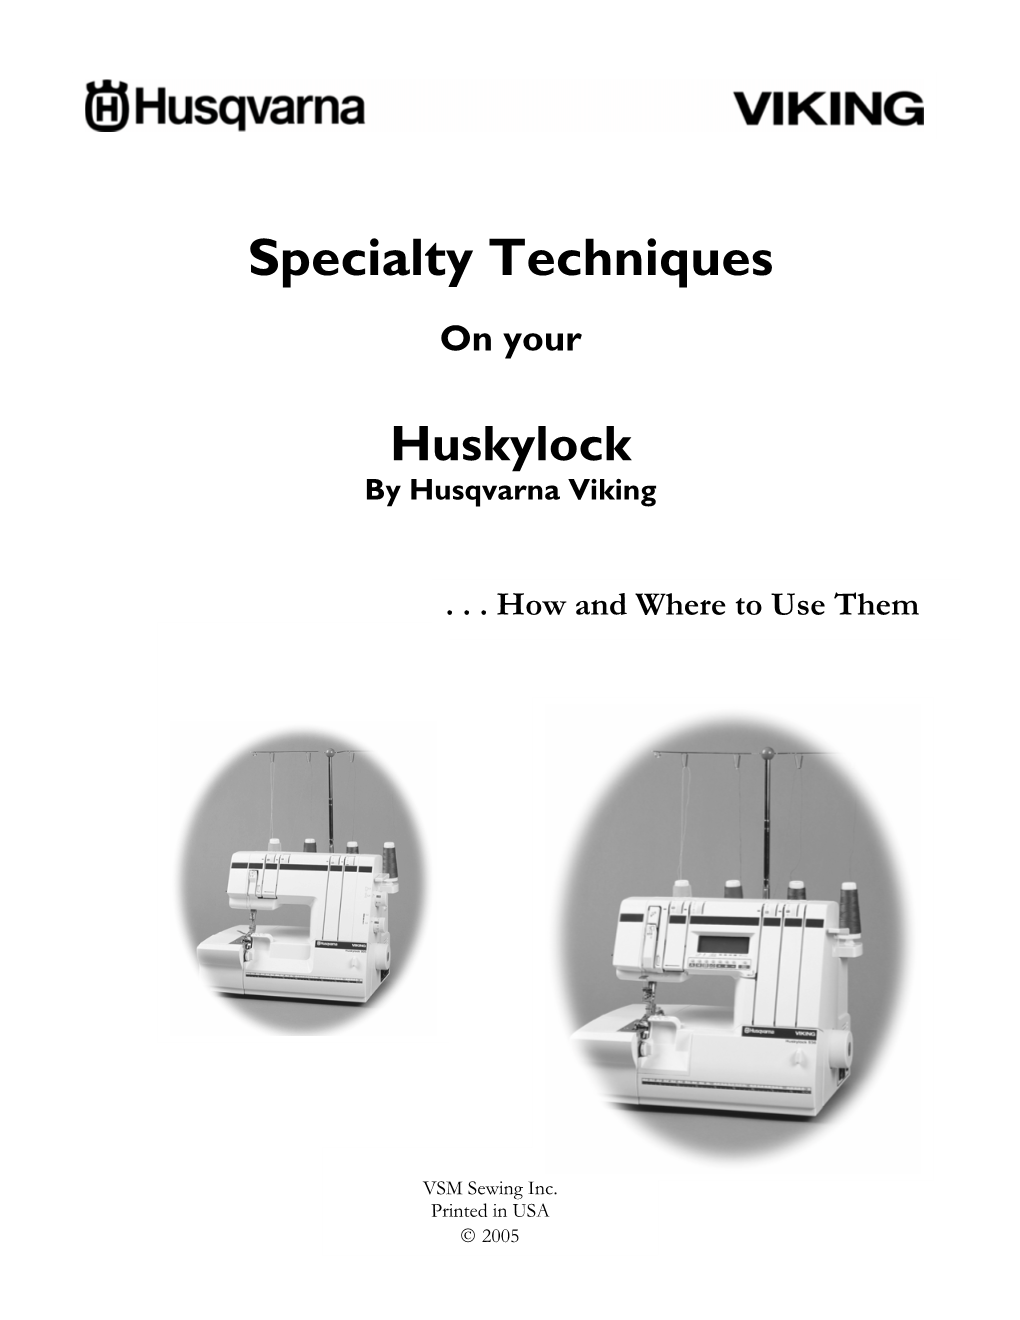 Specialty Techniques on Your Huskylock by Husqvarna Viking